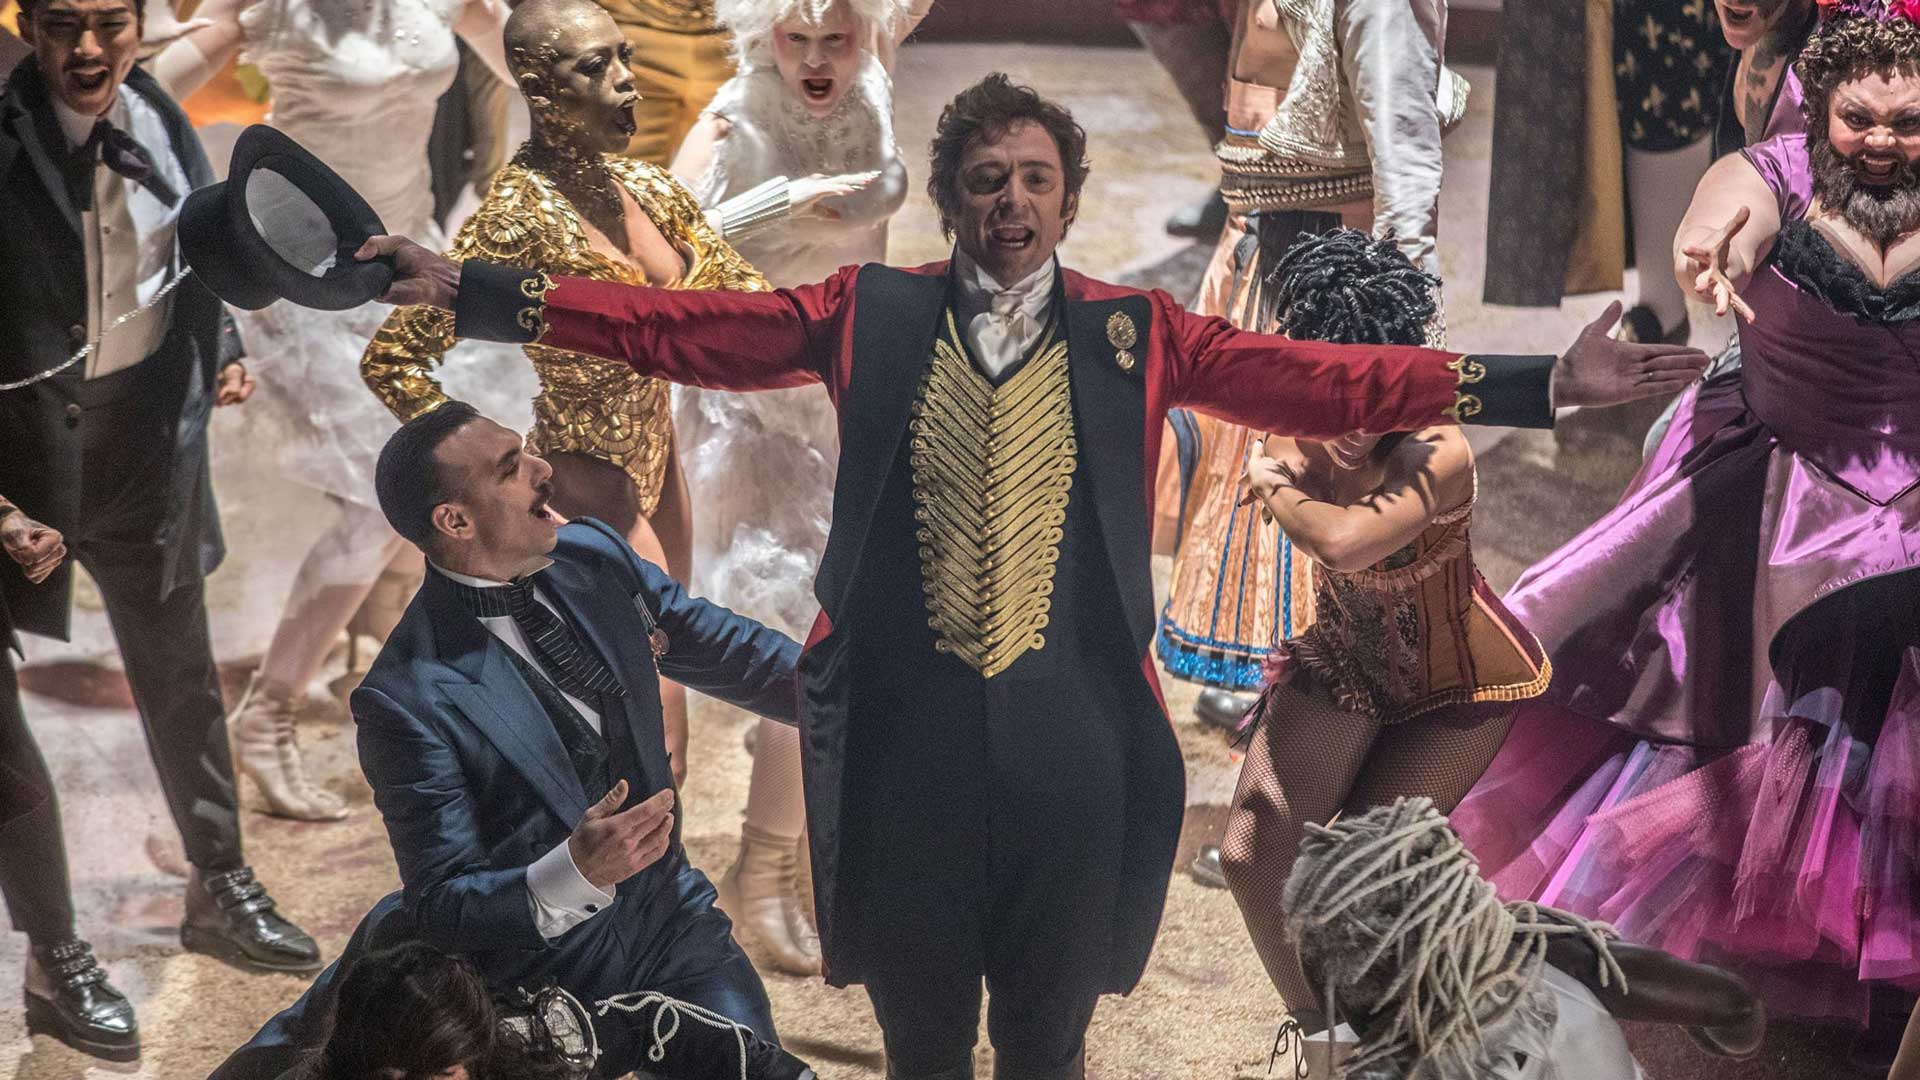 This Immersive 'The Greatest Showman' Soiree Will Transport You to a 19th Century Circus